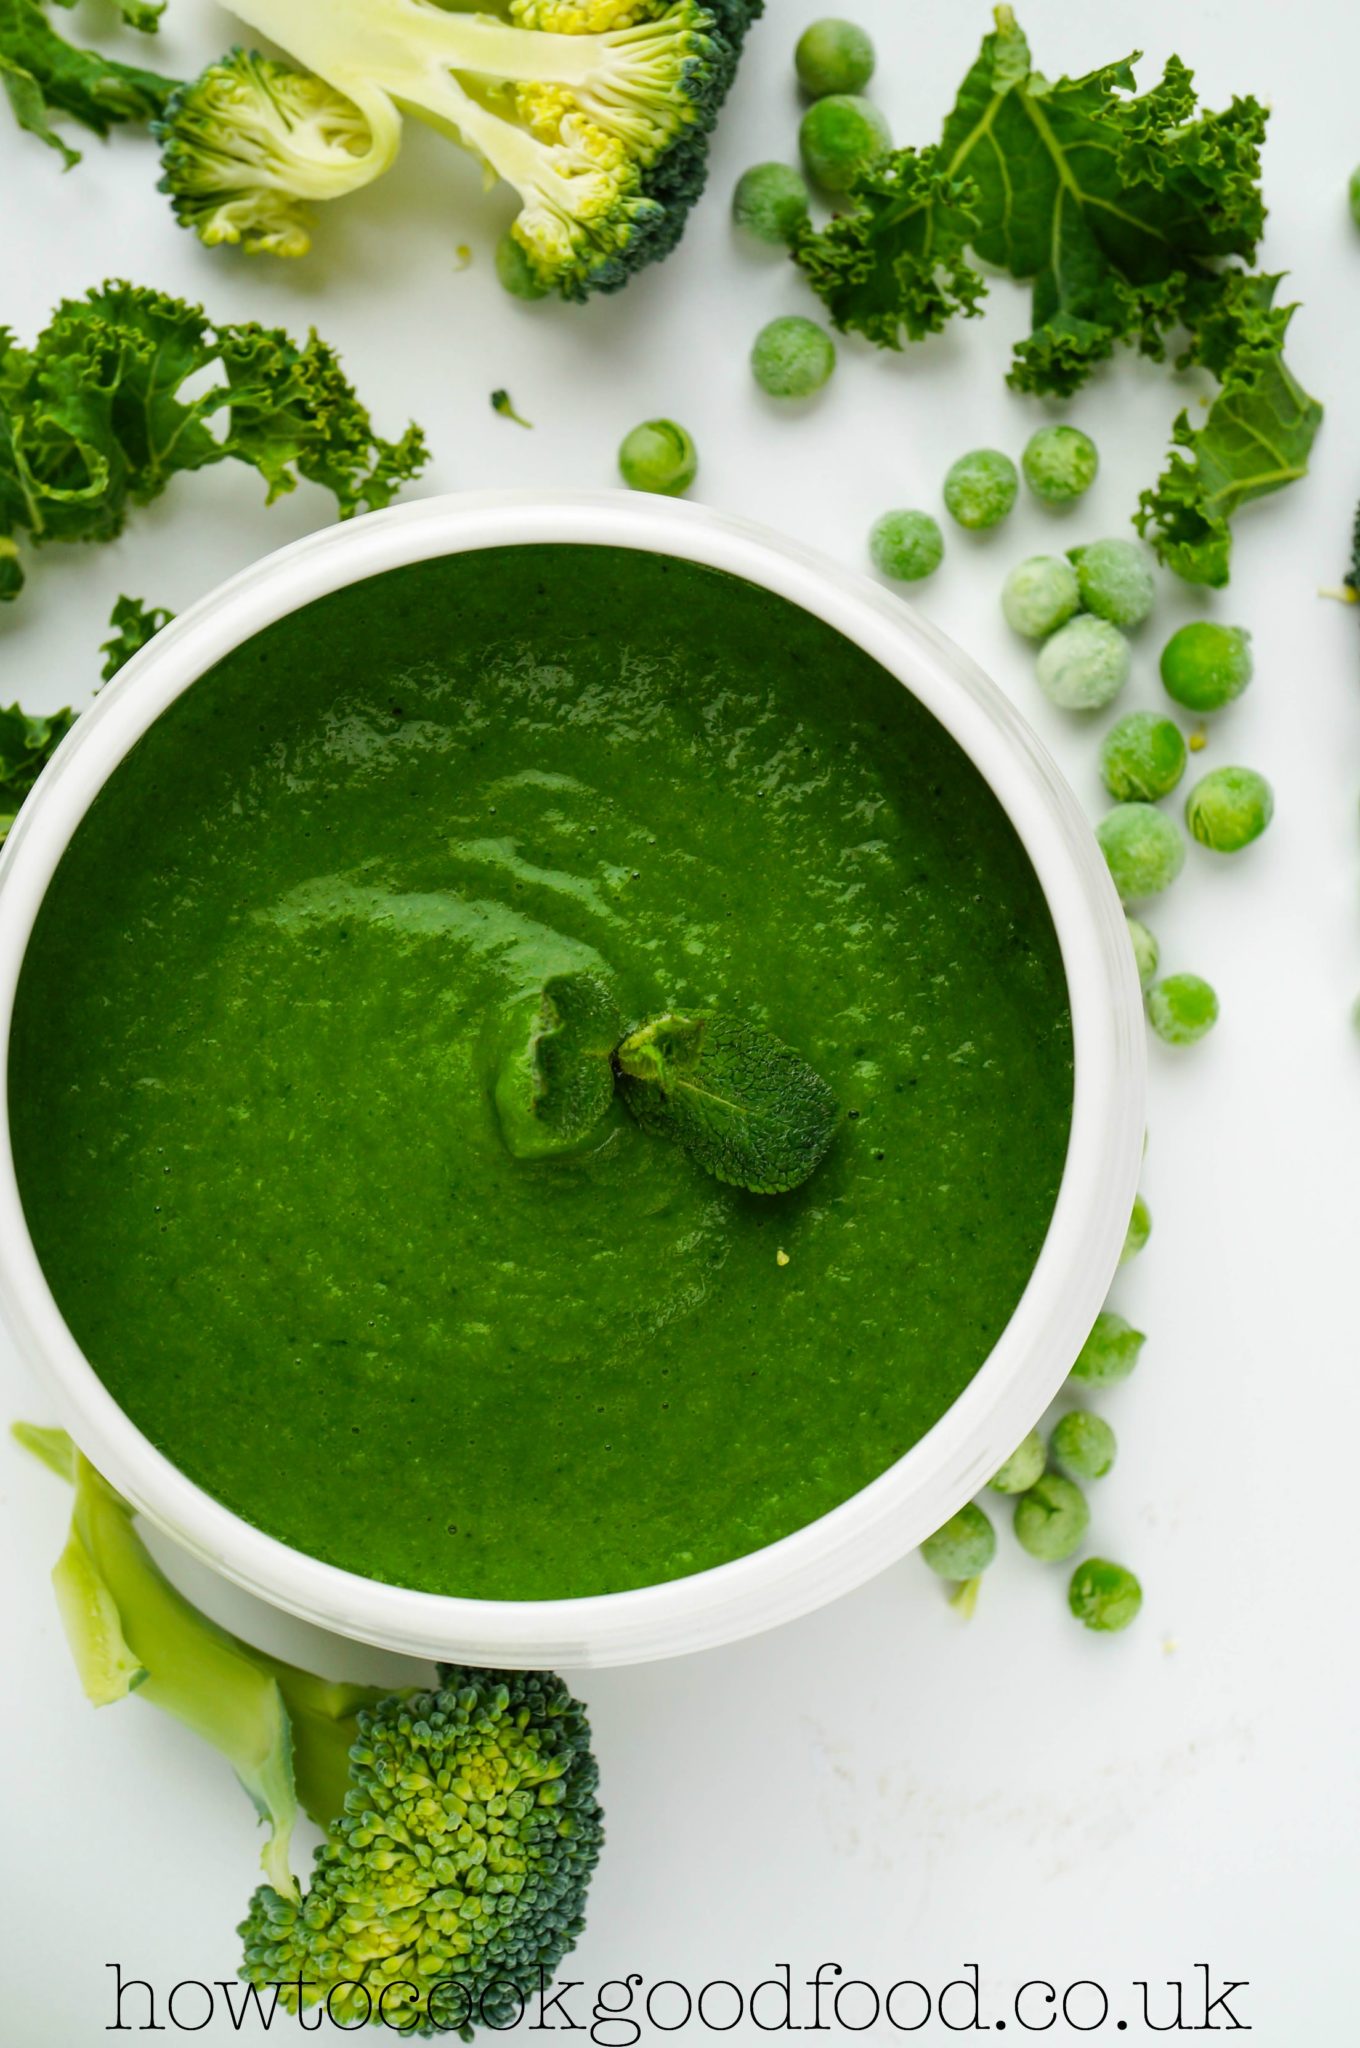 supergreens soup packed with greens such as kale, spinach, peas and courgettes